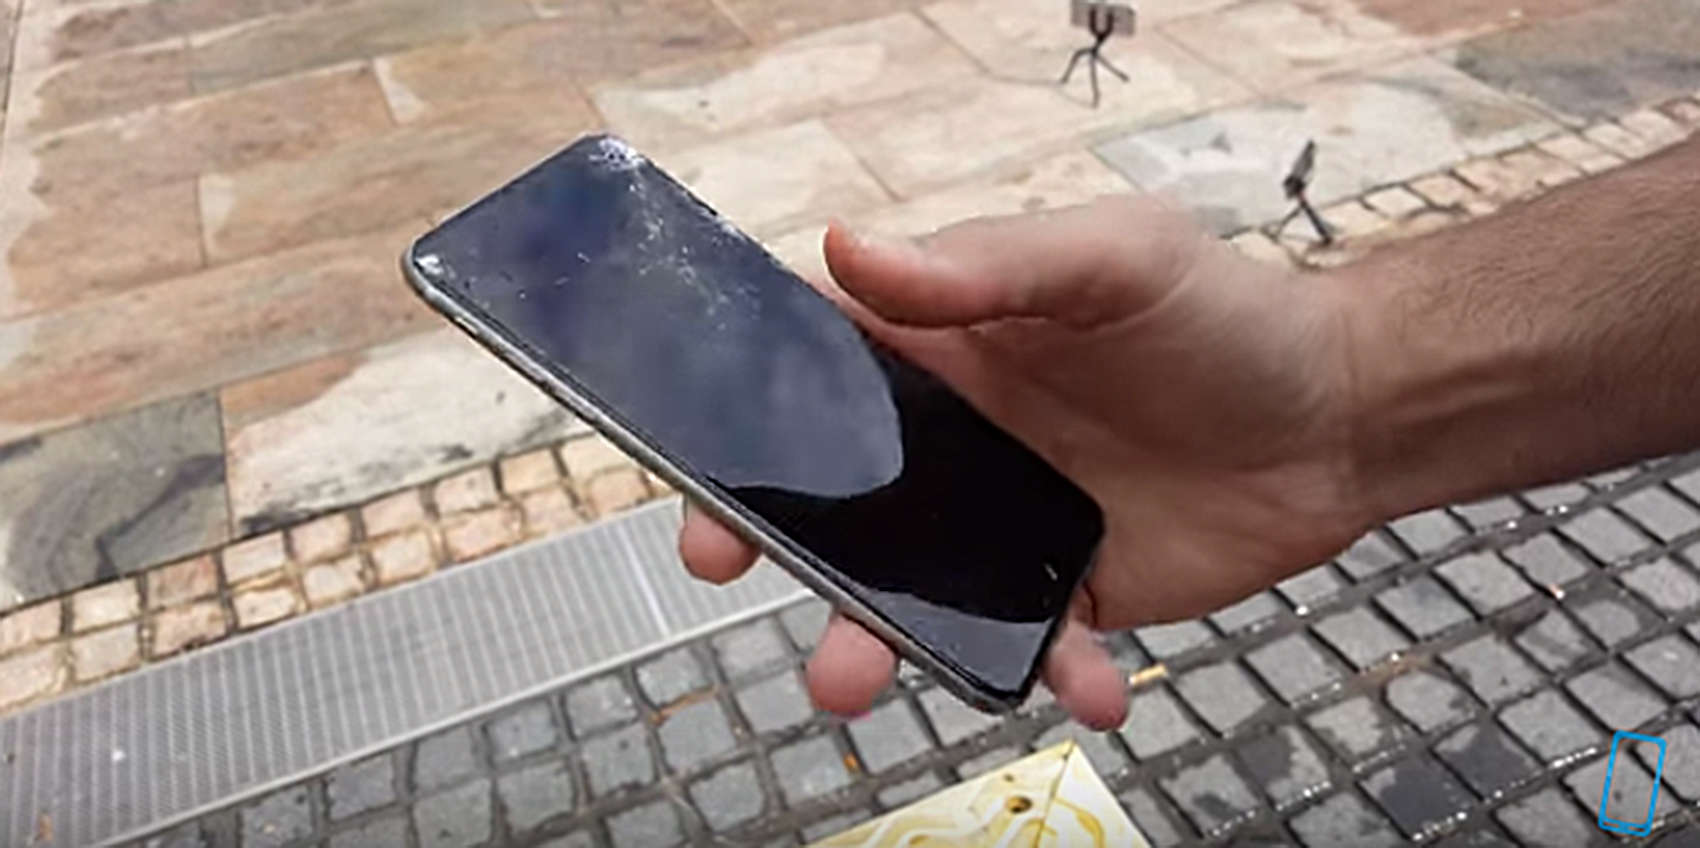 The glass on this iPhone 6s Plus cracked when it was dropped on its face.